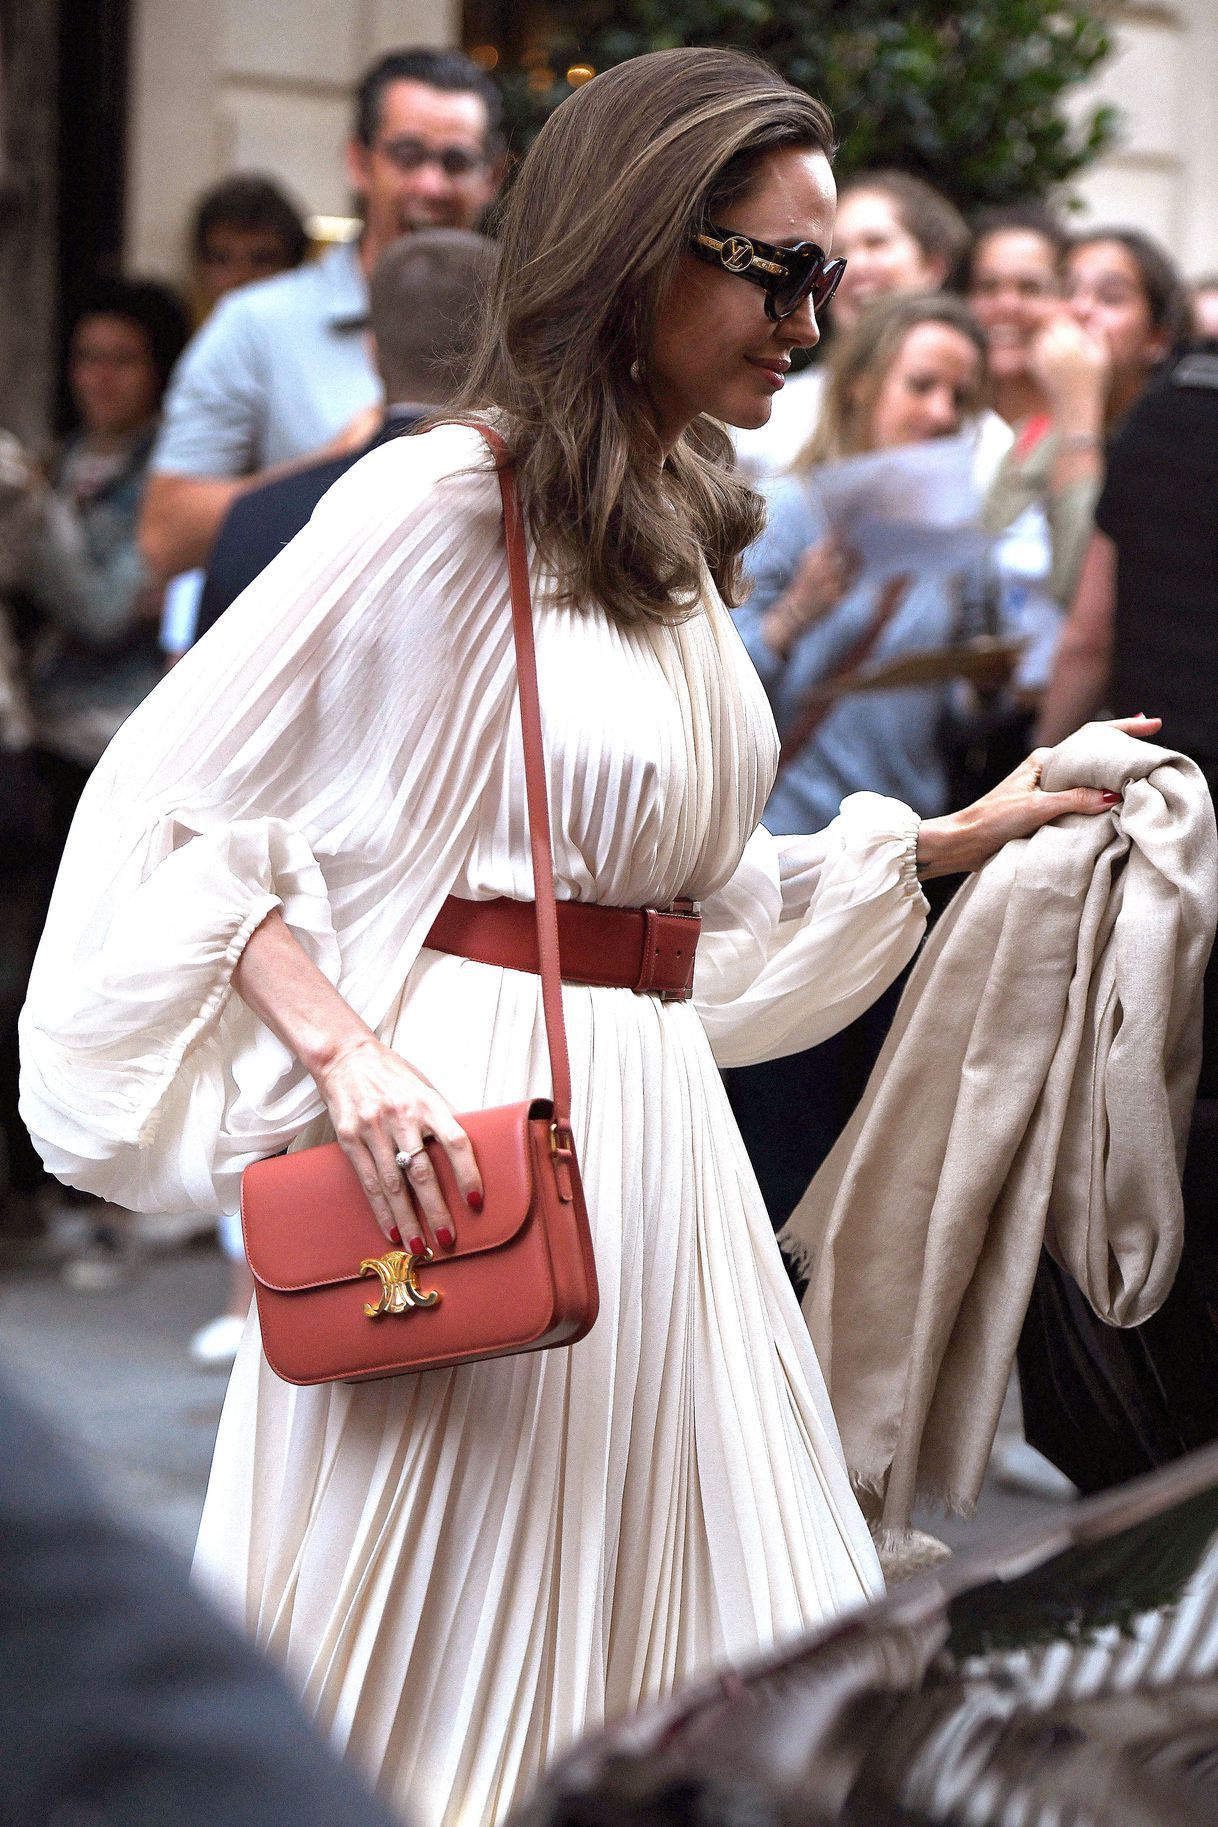 Angelina Jolie in a beige chiffon dress with a letaher belt